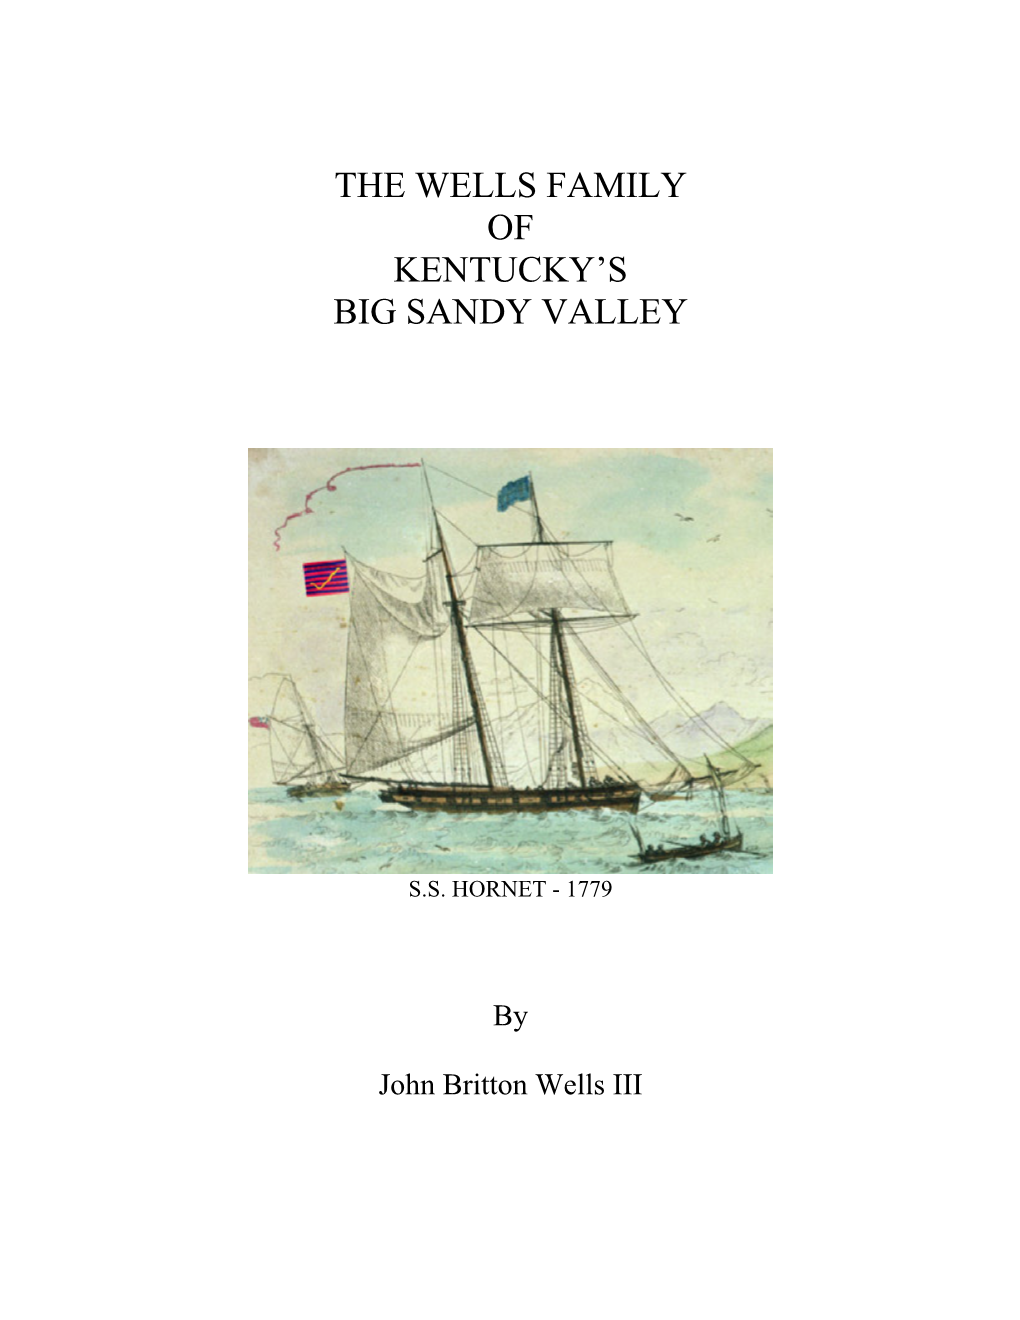 The Wells Family of Kentucky's Big Sandy Valley